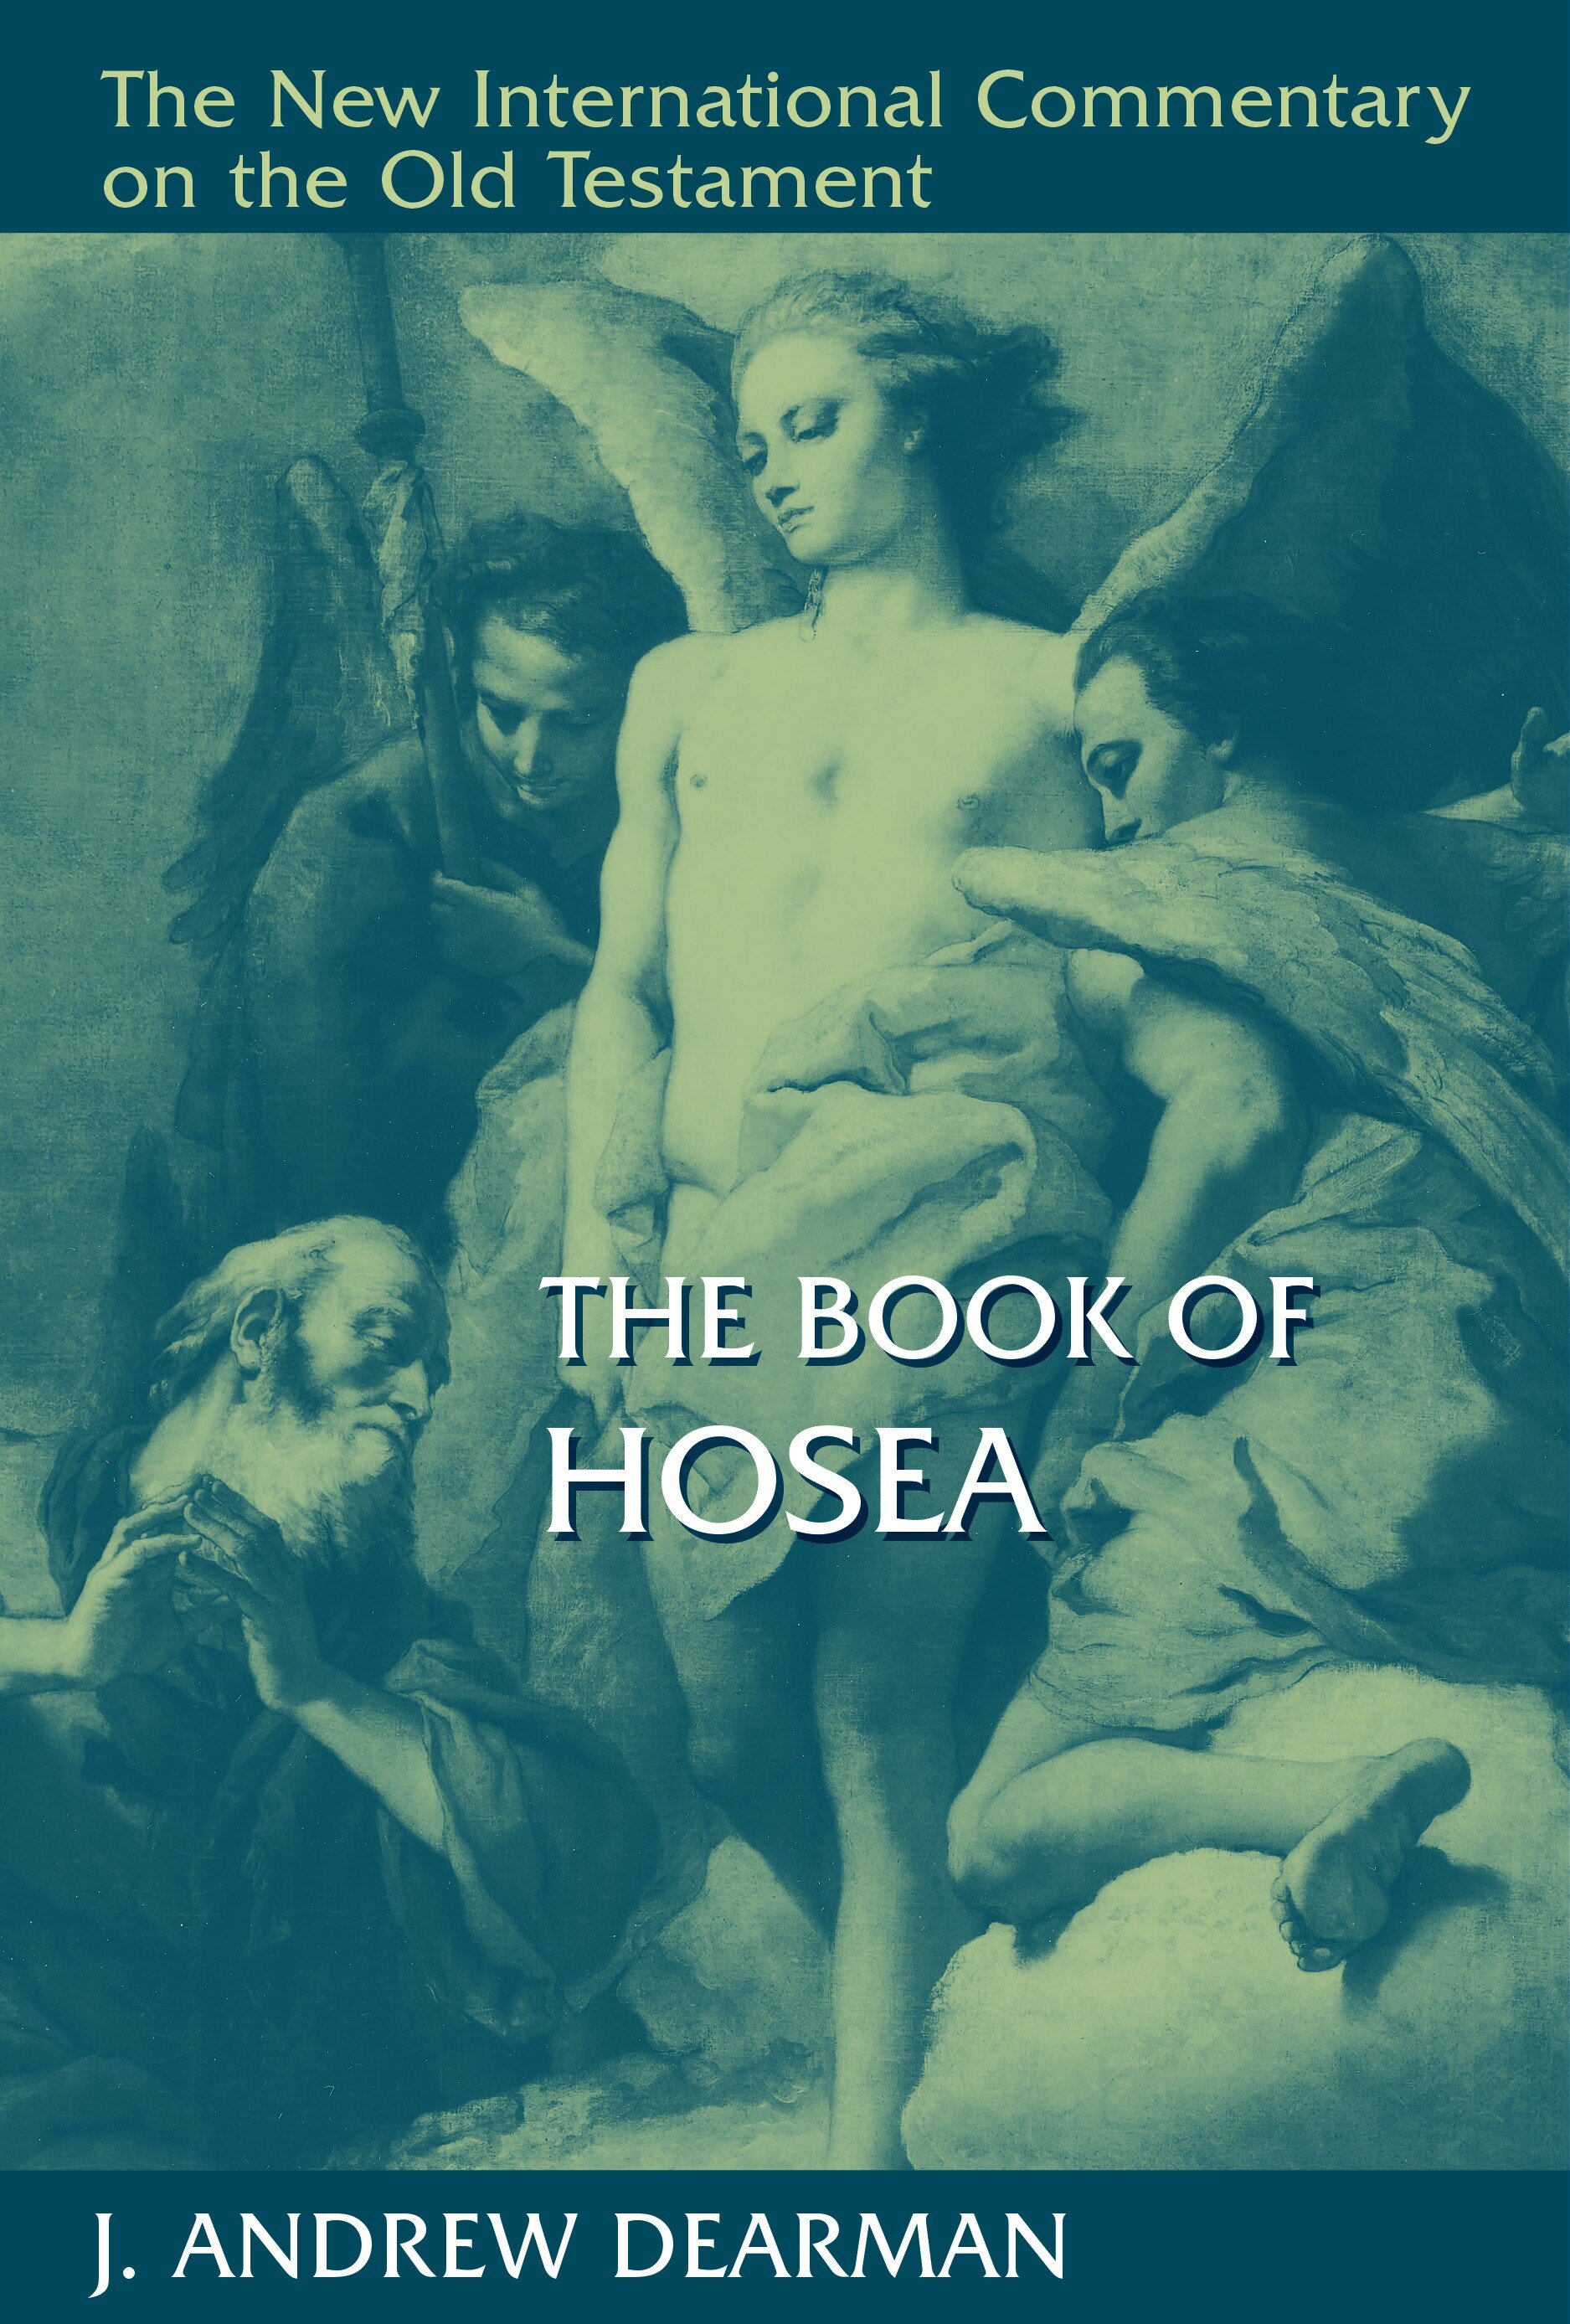 The Book of Hosea (The New International Commentary on the Old Testament | NICOT)